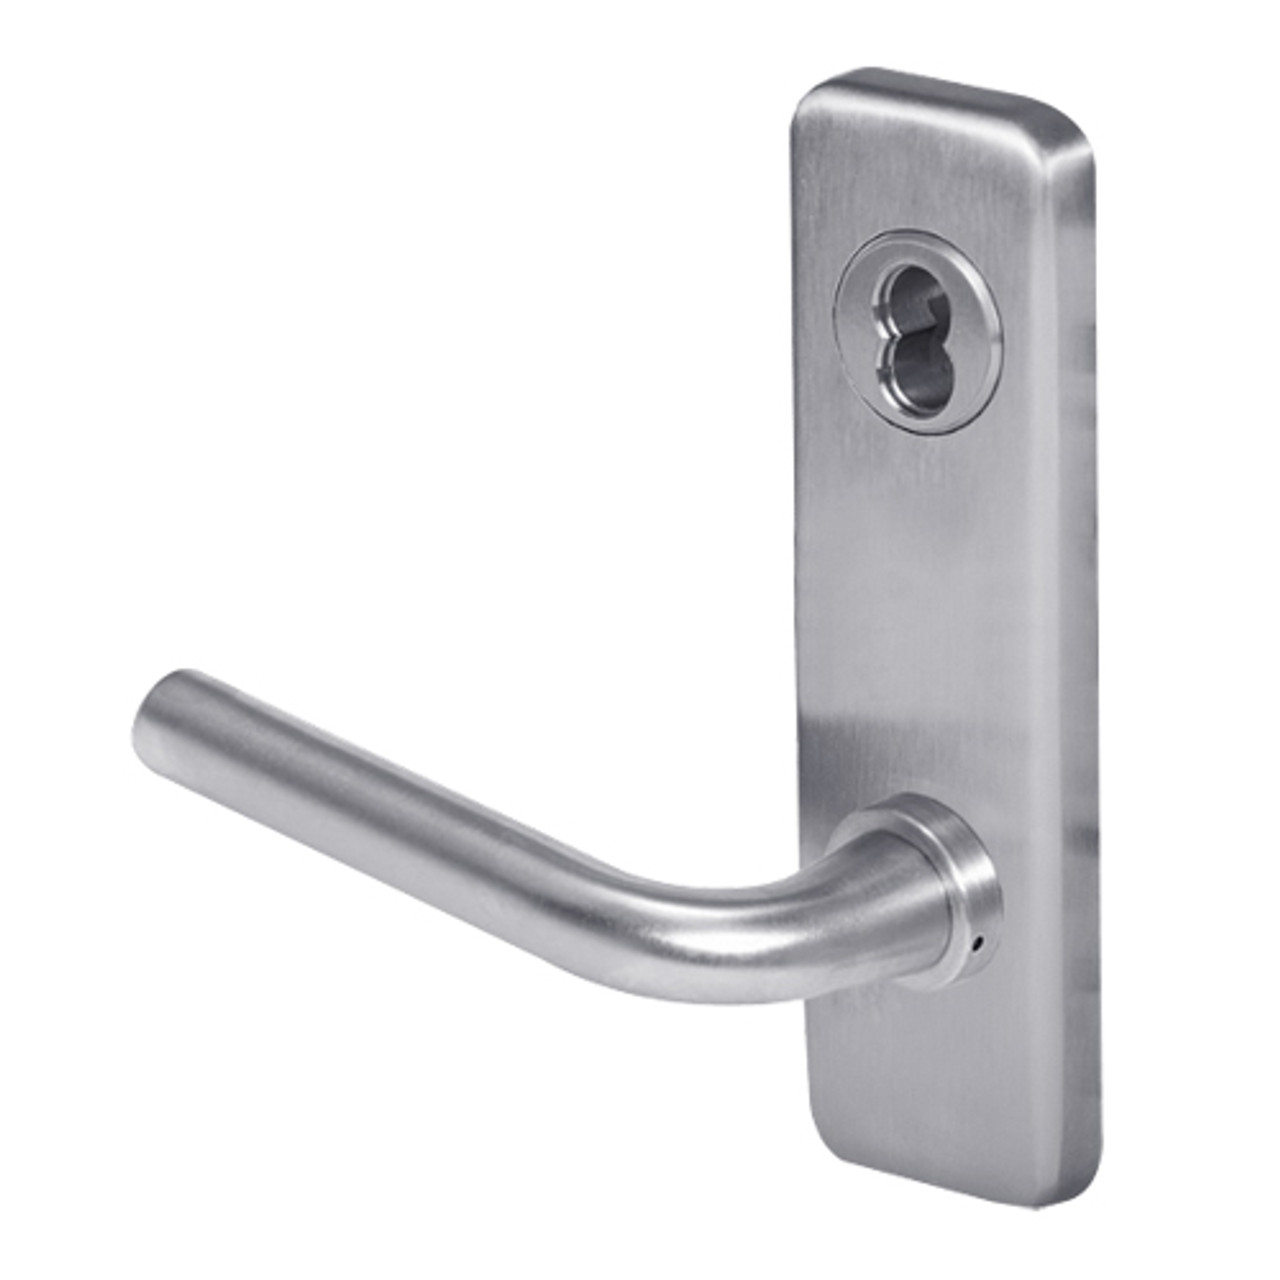 45HW7TWEL12J626 Best 40HW series Double Key Deadbolt Fail Safe Electromechanical Mortise Lever Lock with Solid Tube w/ No Return Style in Satin Chrome